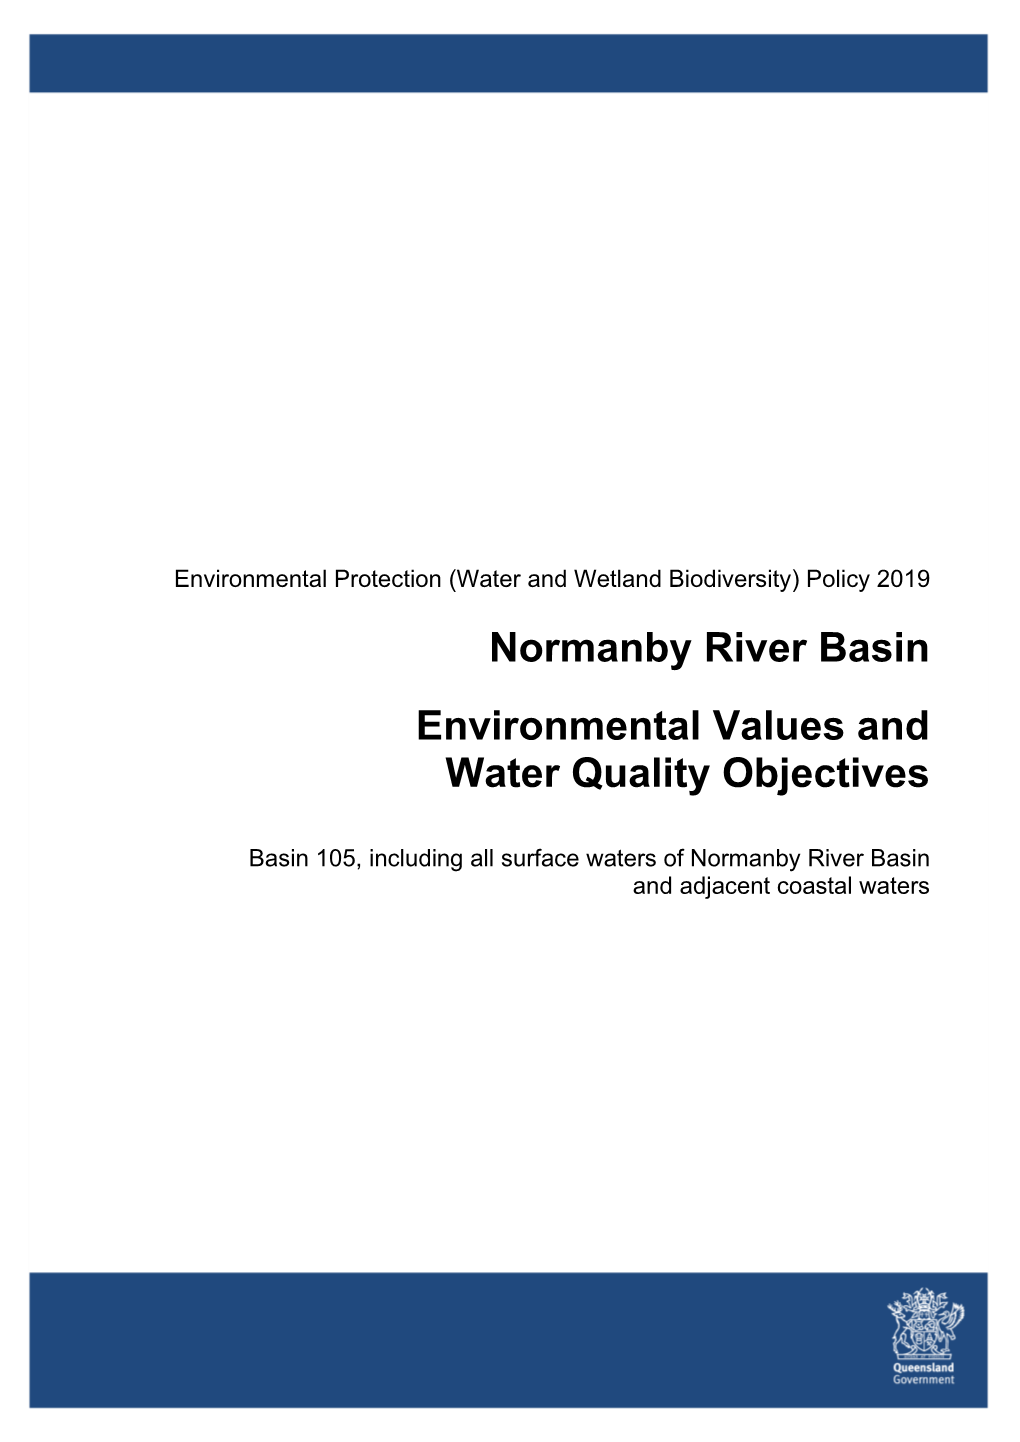 Normanby River Basin Environmental Values and Water Quality Objectives